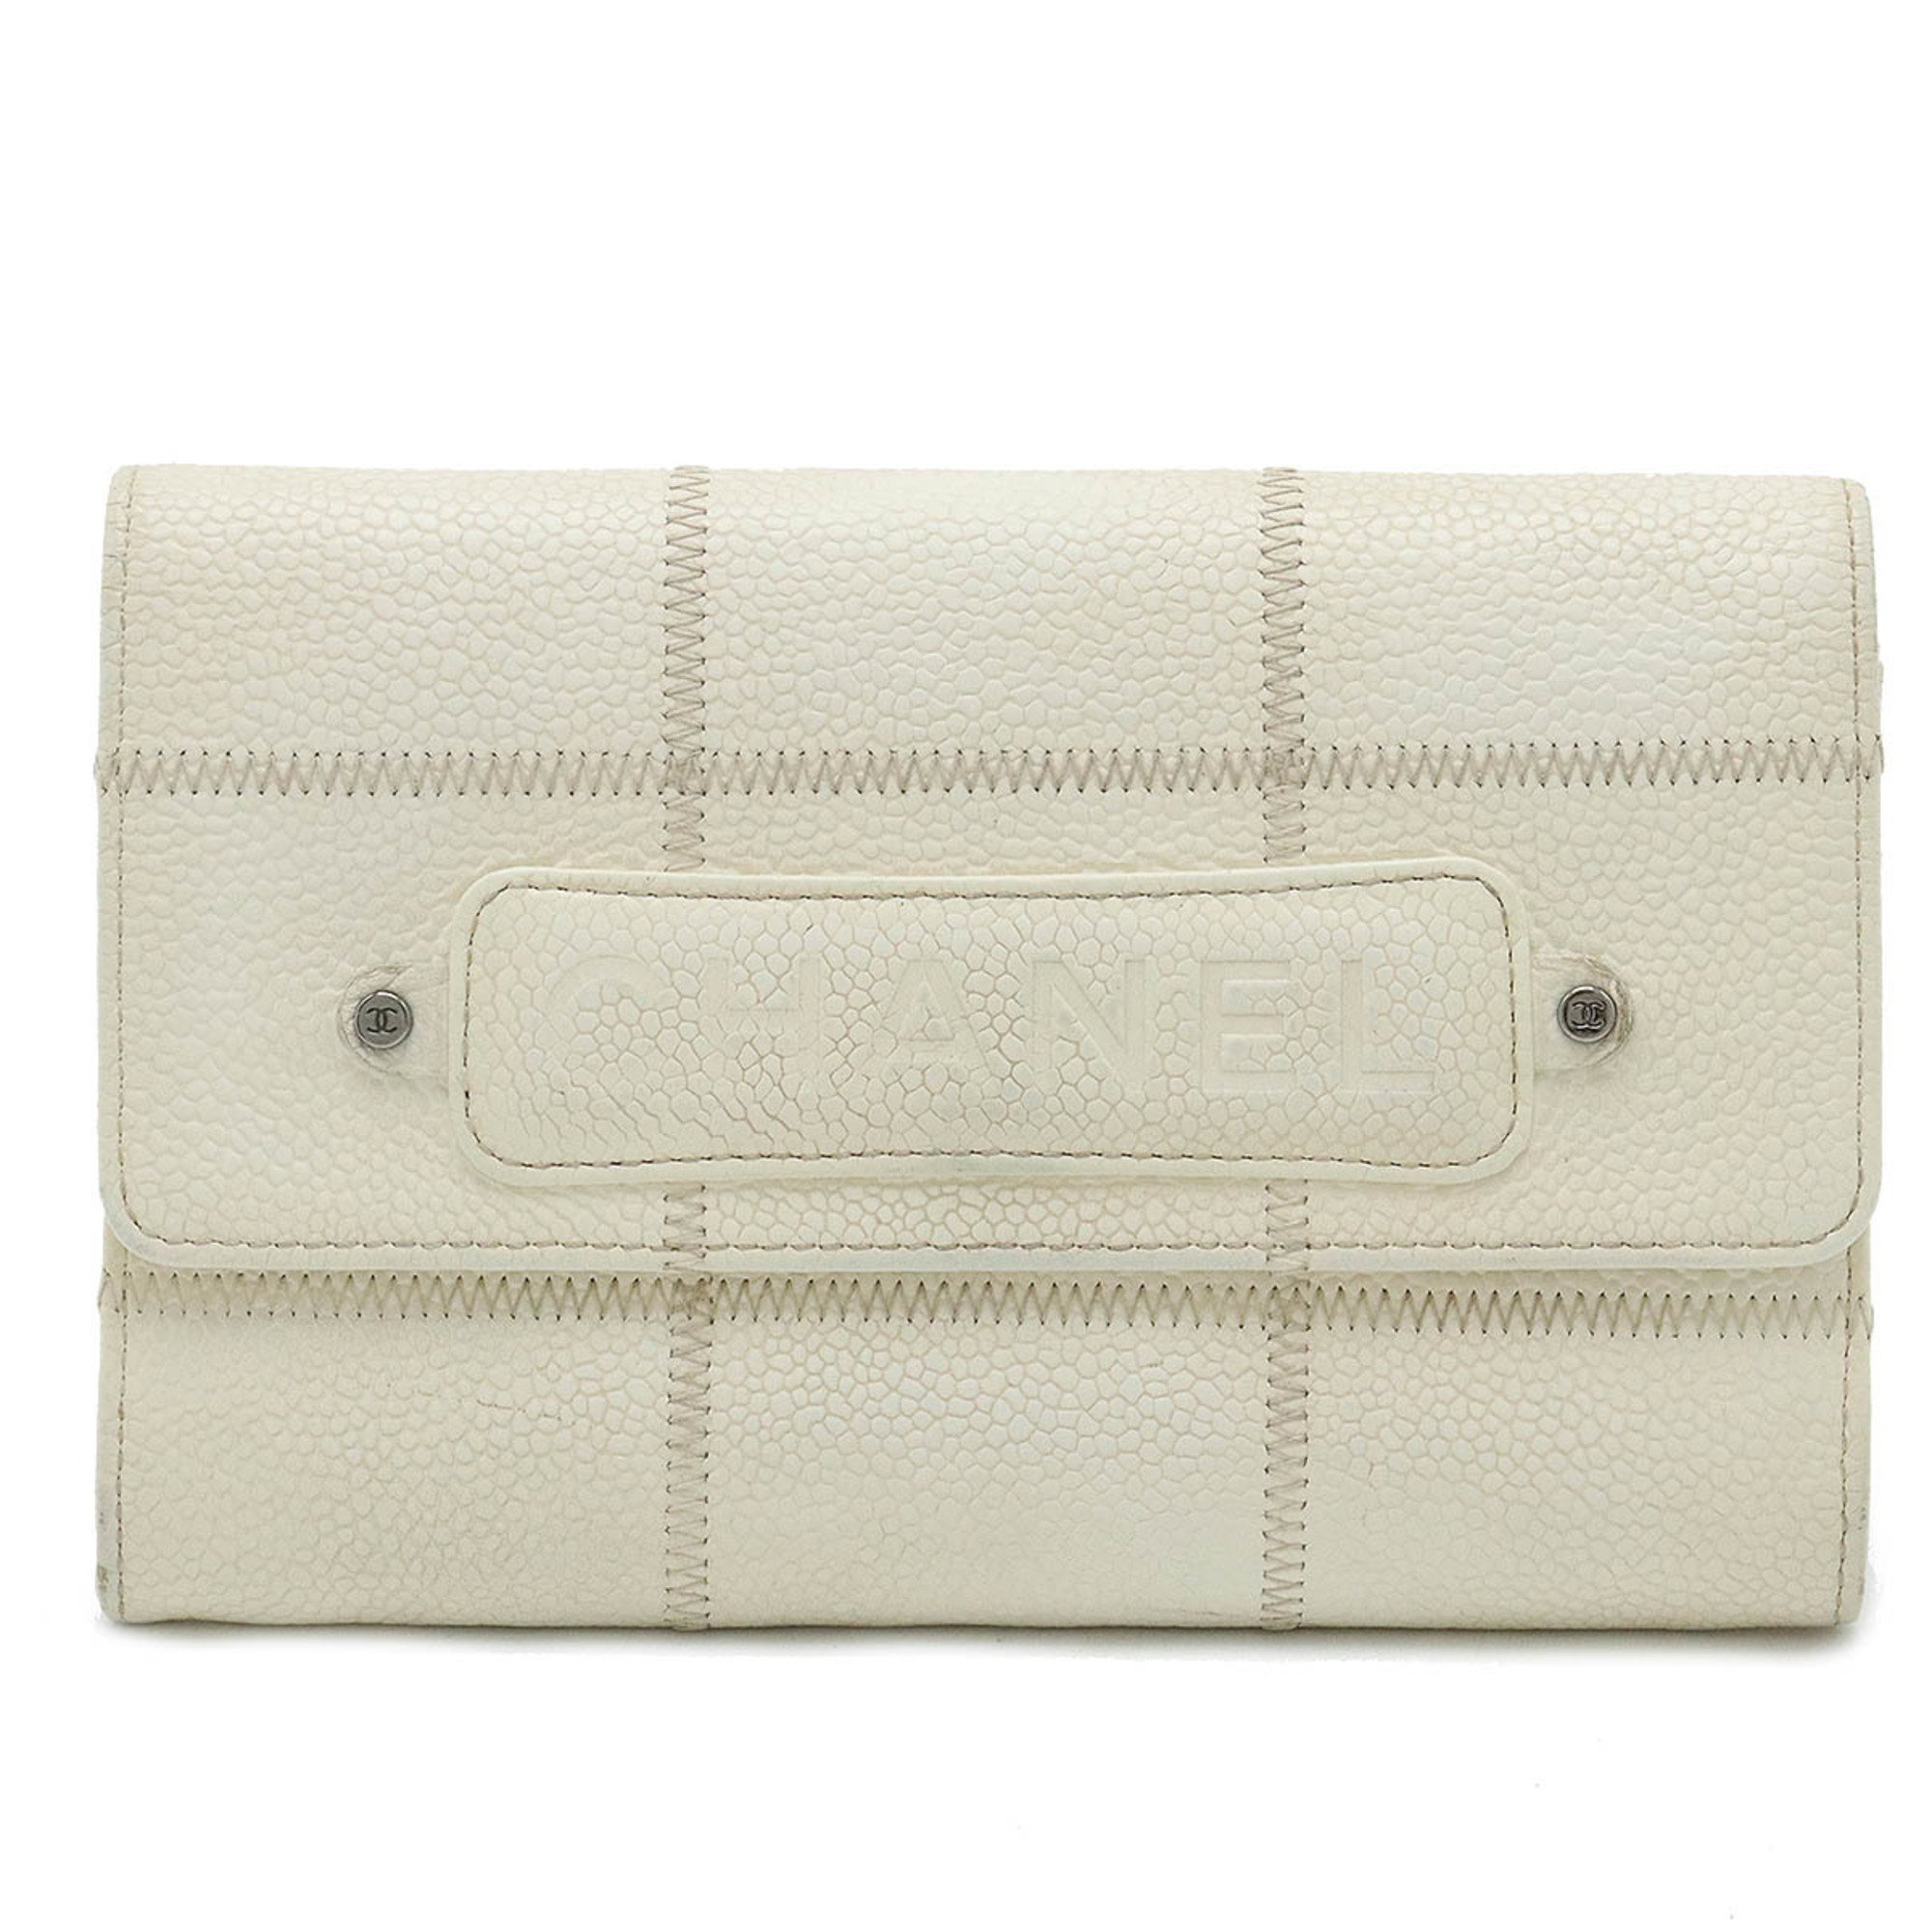 CHANEL Chocolate Bar Bi-fold Wallet with Coin Purse, Caviar Skin, Leather, Off-White